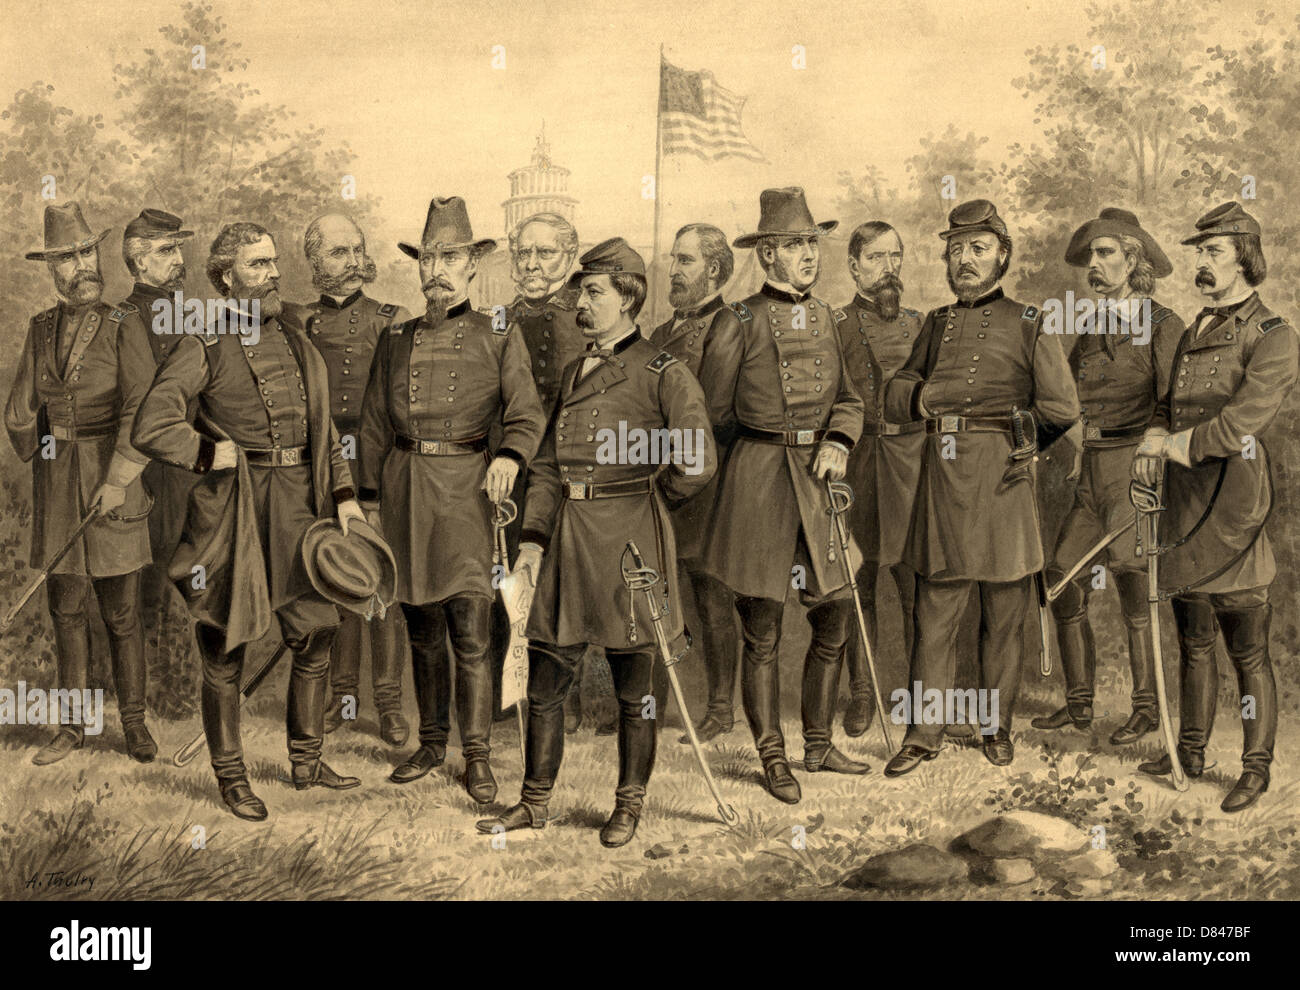 U.S. Army and Cavalry officers in front of the U.S. Capitol Building, circa 1862, during USA Civil War Stock Photo